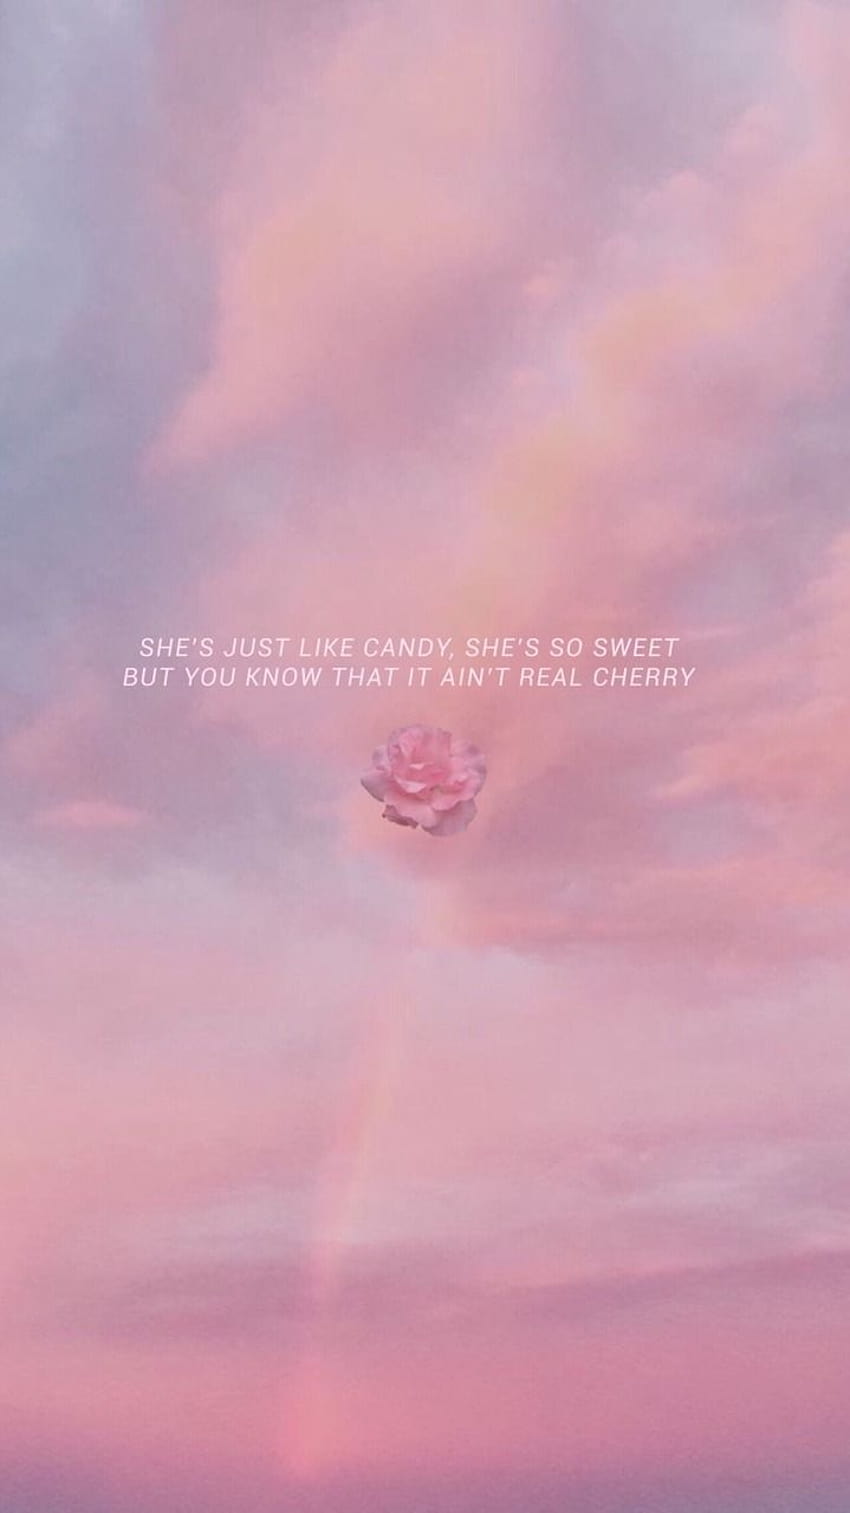 Pink aesthetic wallpaper, cotton candy, quote about a girl - Doja Cat